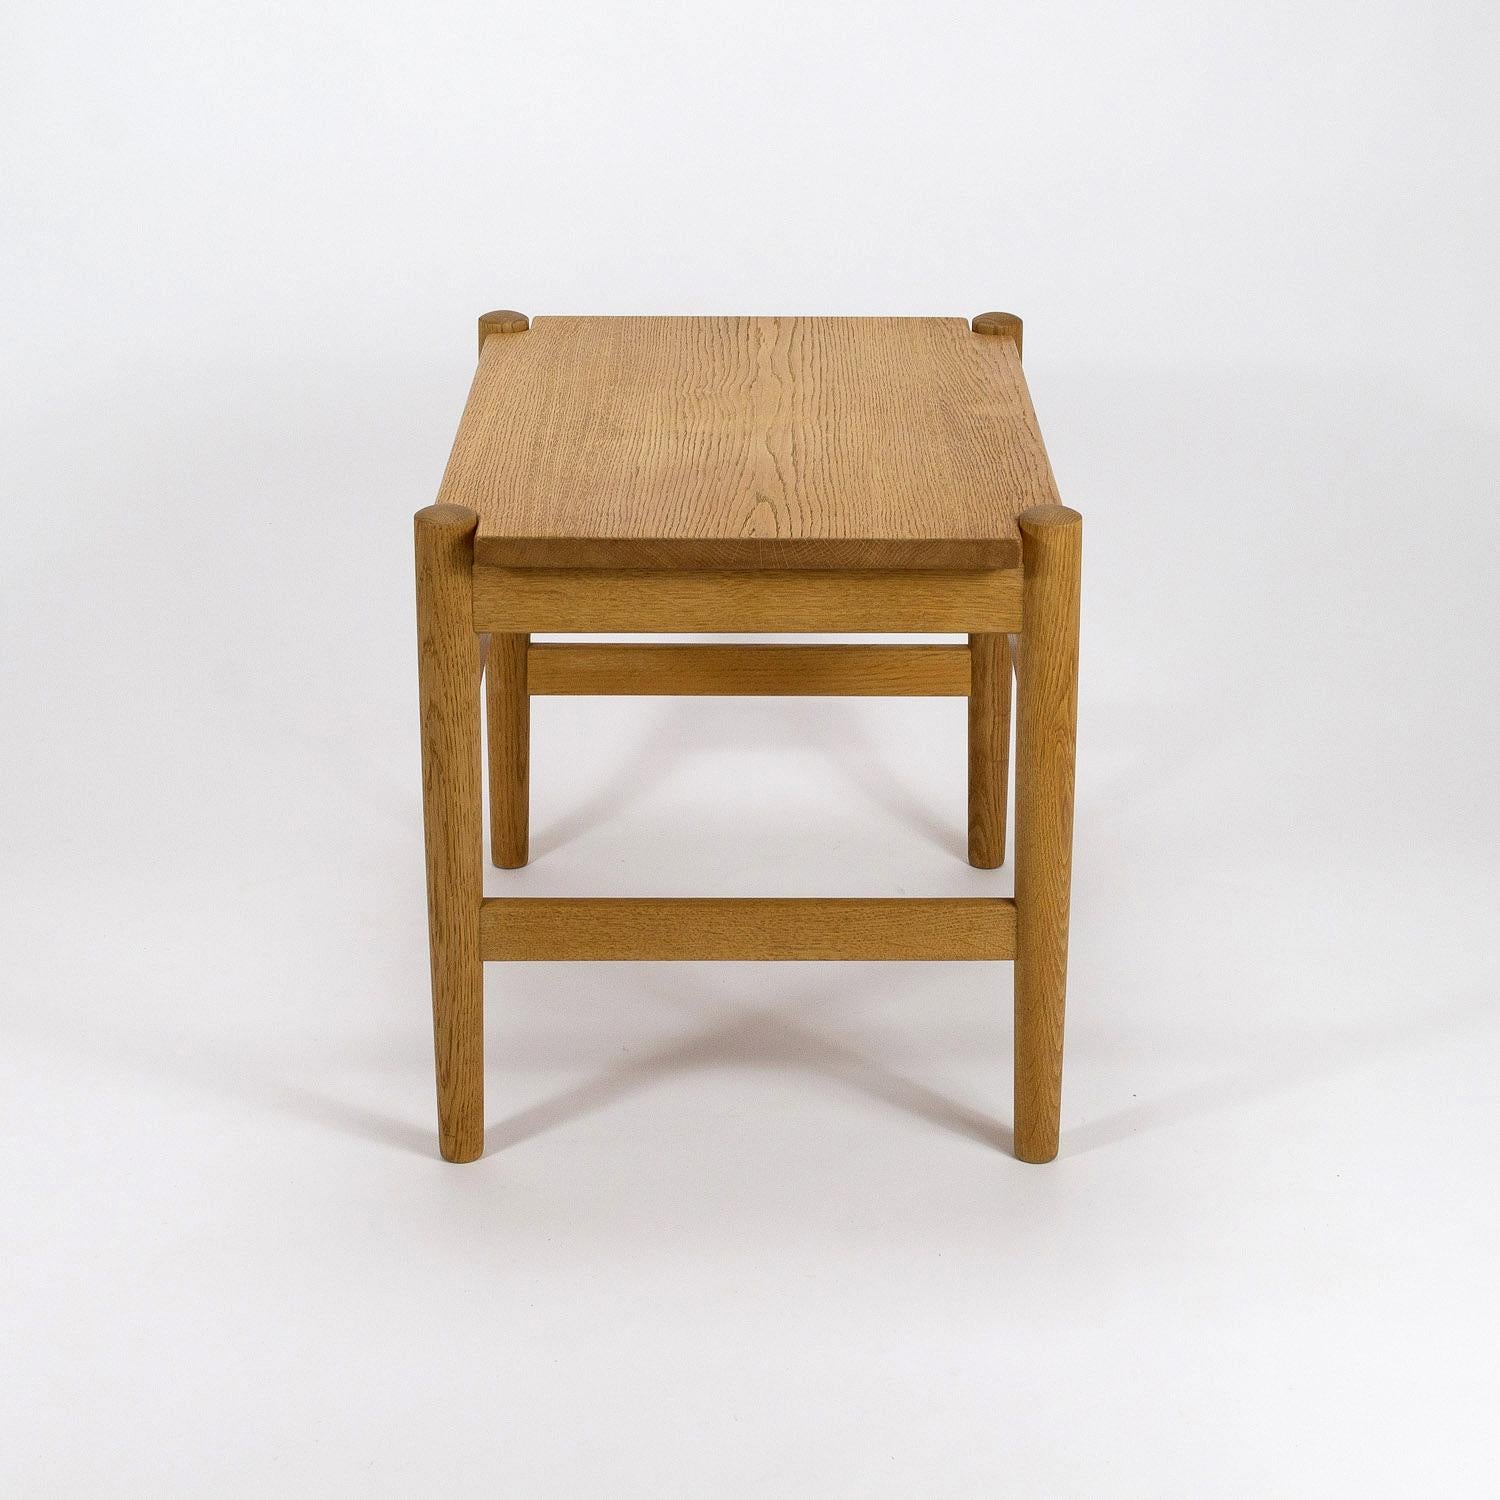 A solid oak midcentury model AT50 coffee table by Hans Wegner for cabinetmaker Andreas Tuck, Denmark, 1960s, with reversible top. Good vintage condition, the table has been cleaned and refinished using traditional Danish soap treatment. The